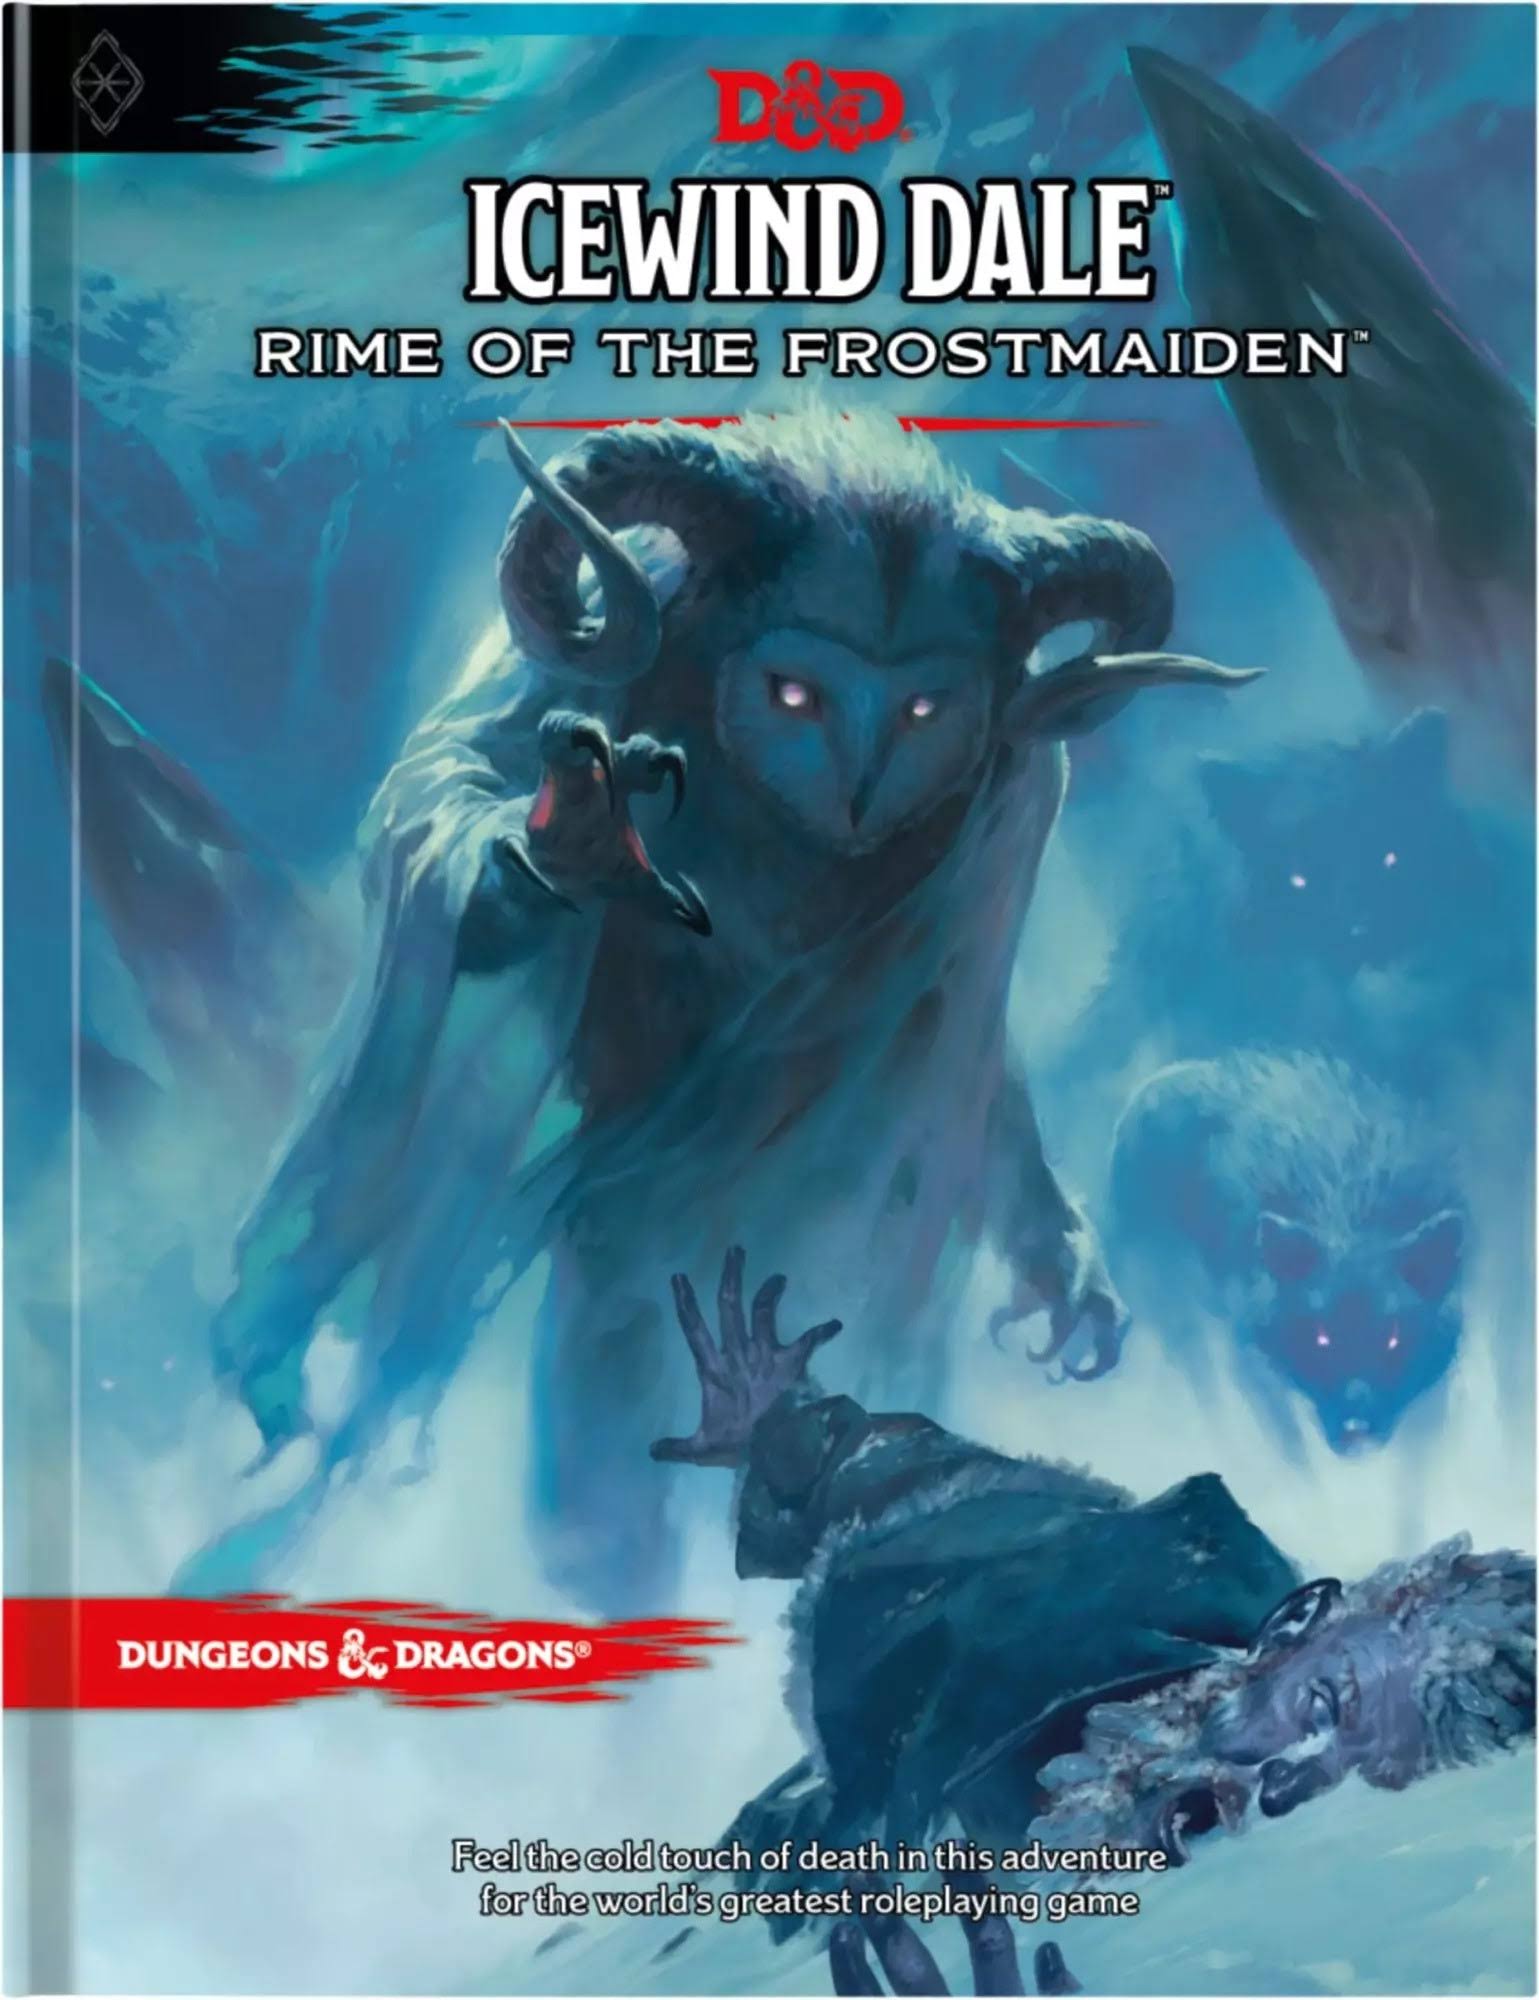 Dungeons & Dragons D&D Icewind Dale: Rime of The Frostmaiden